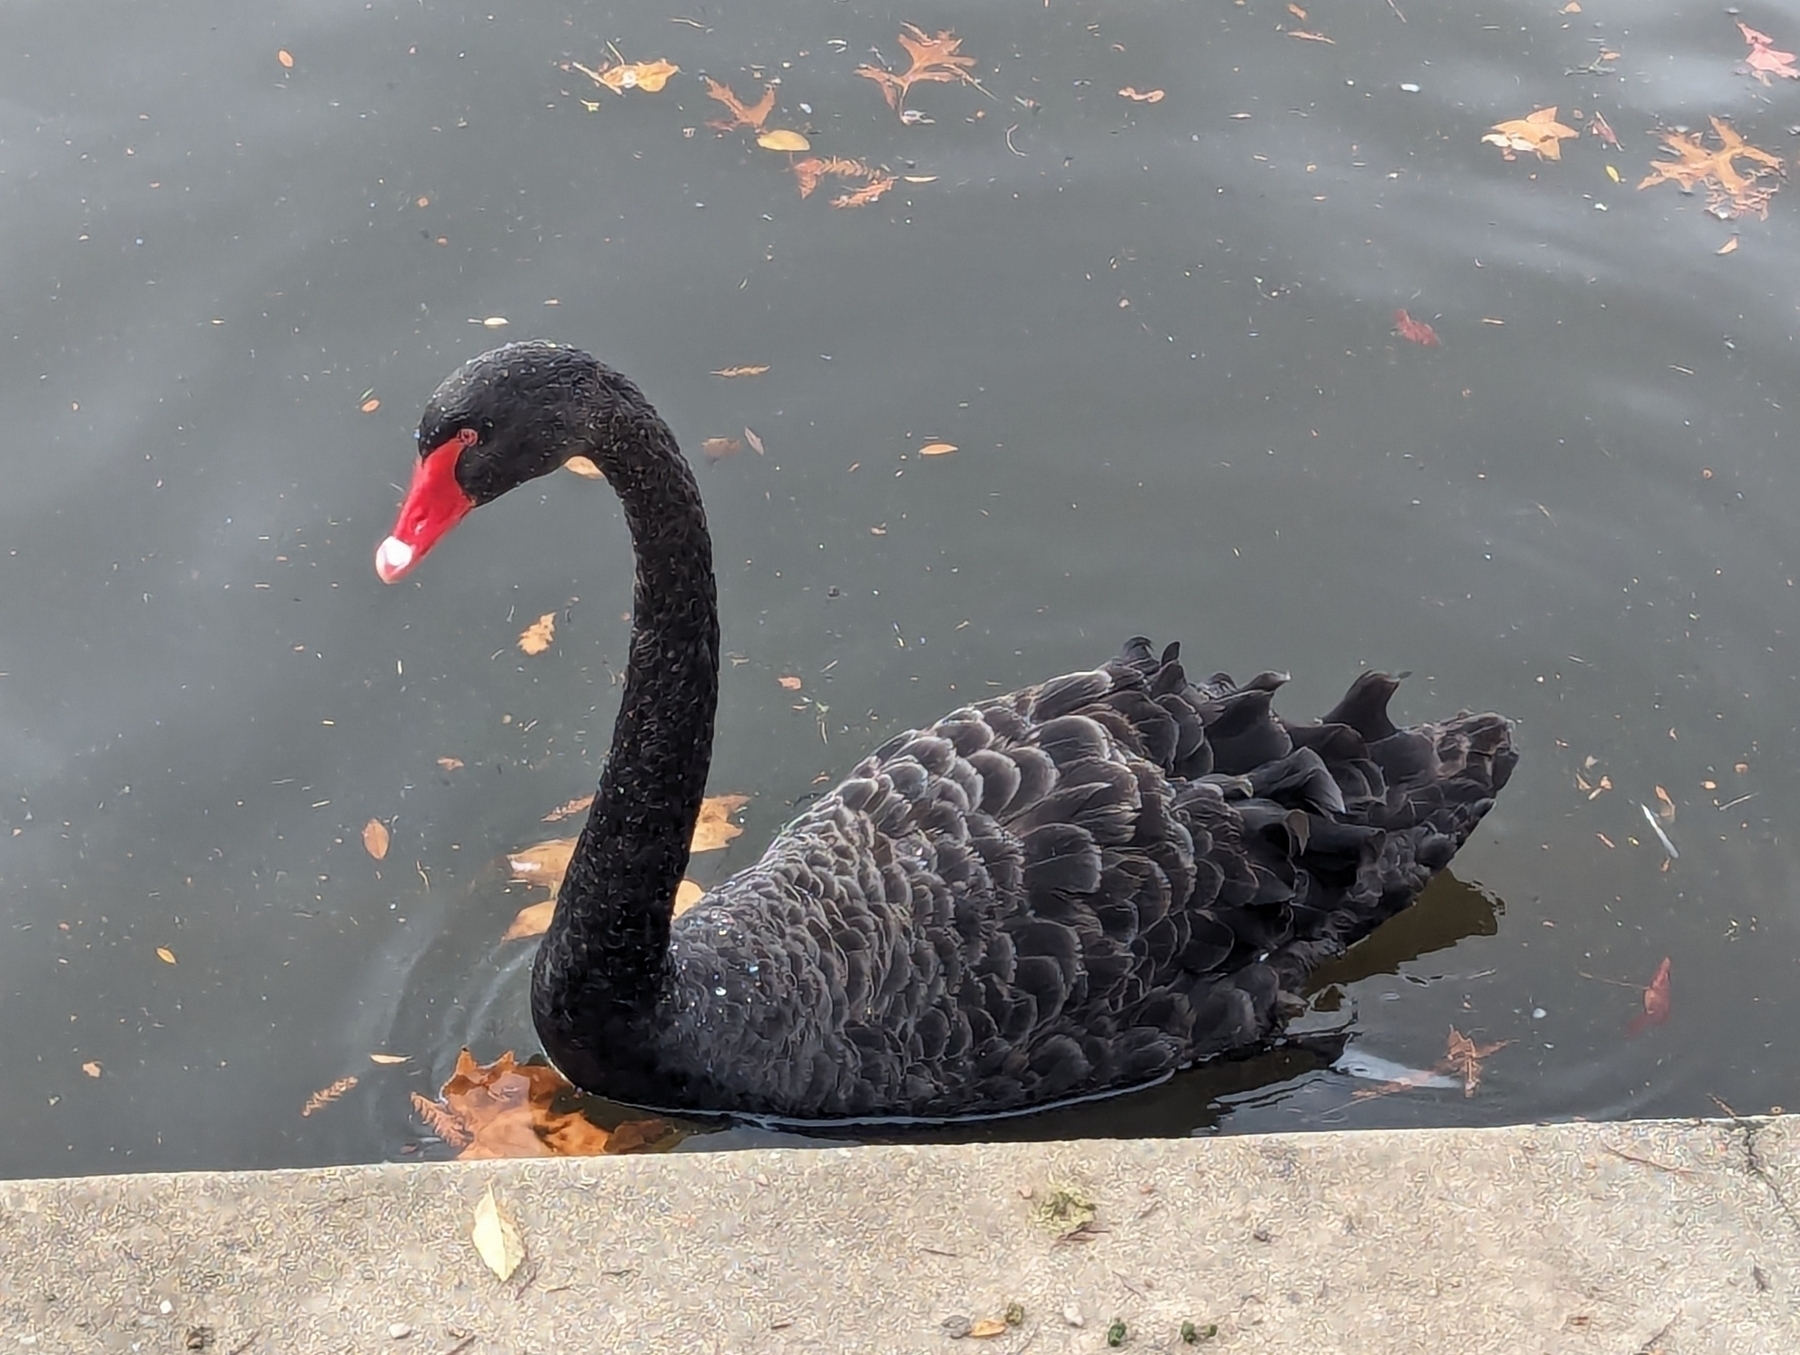 Auto generated description: A black swan with a red beak is swimming in a body of water near a concrete step.